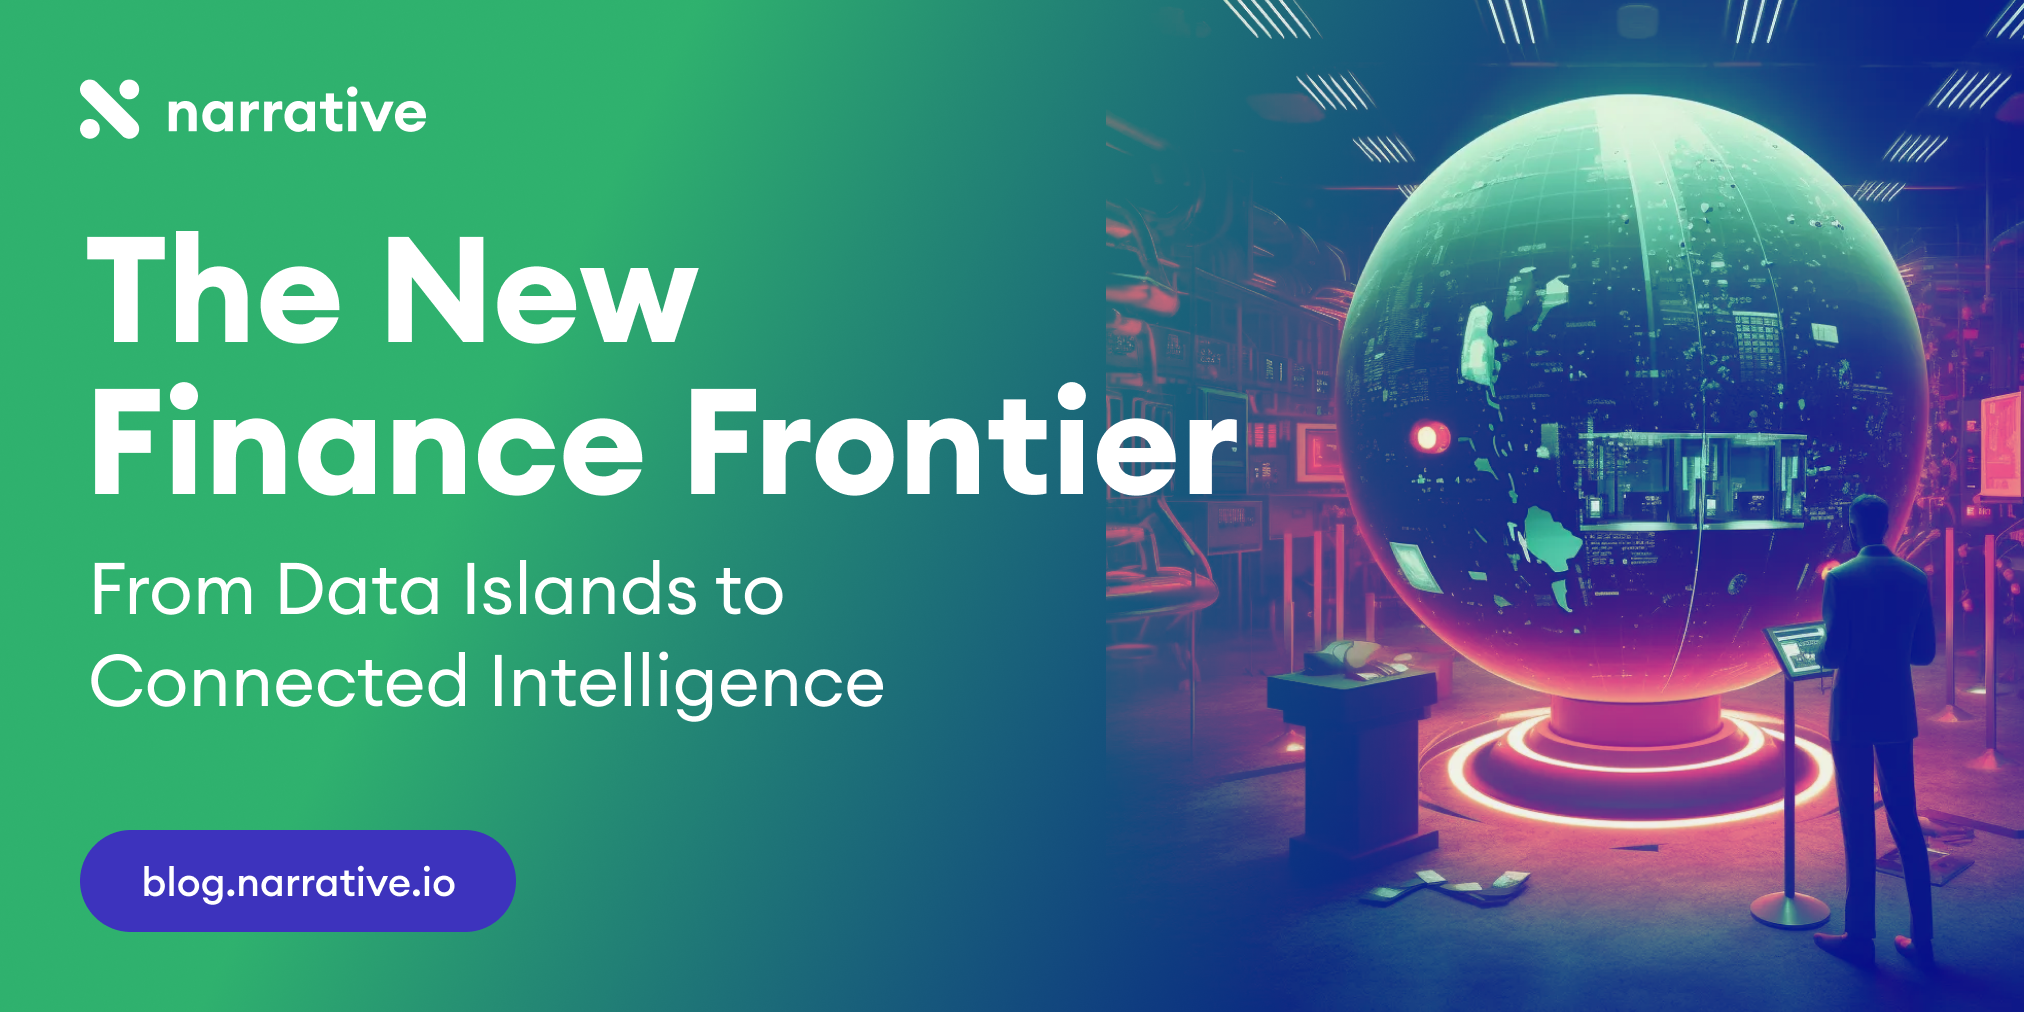 The New Finance Frontier: From Data Islands to Connected Intelligence